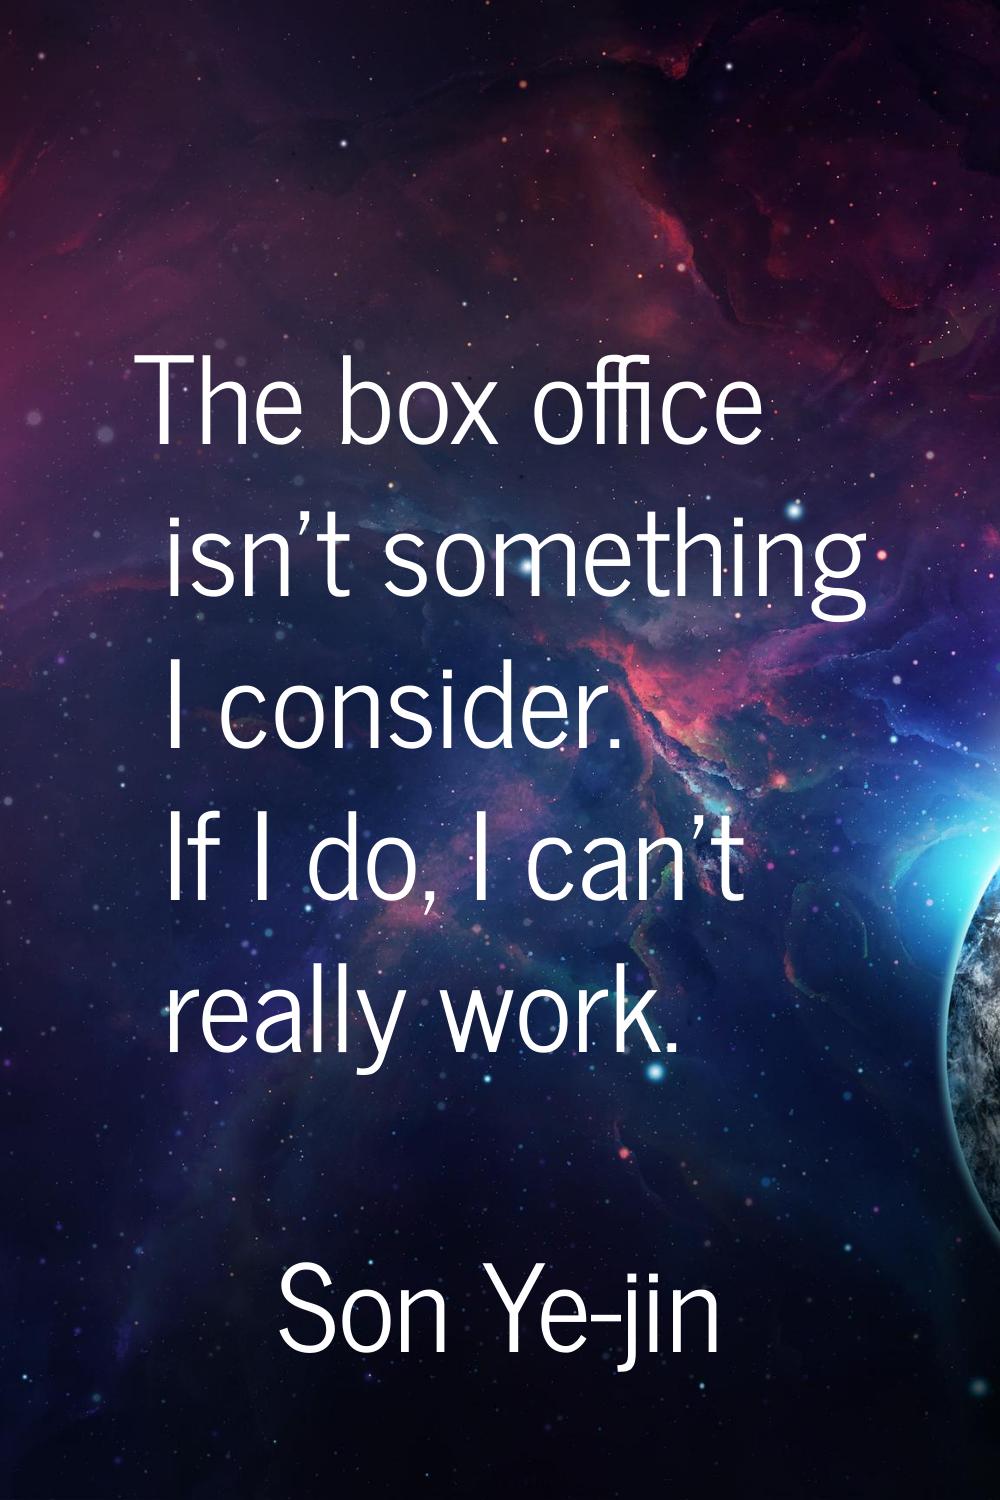 The box office isn't something I consider. If I do, I can't really work.